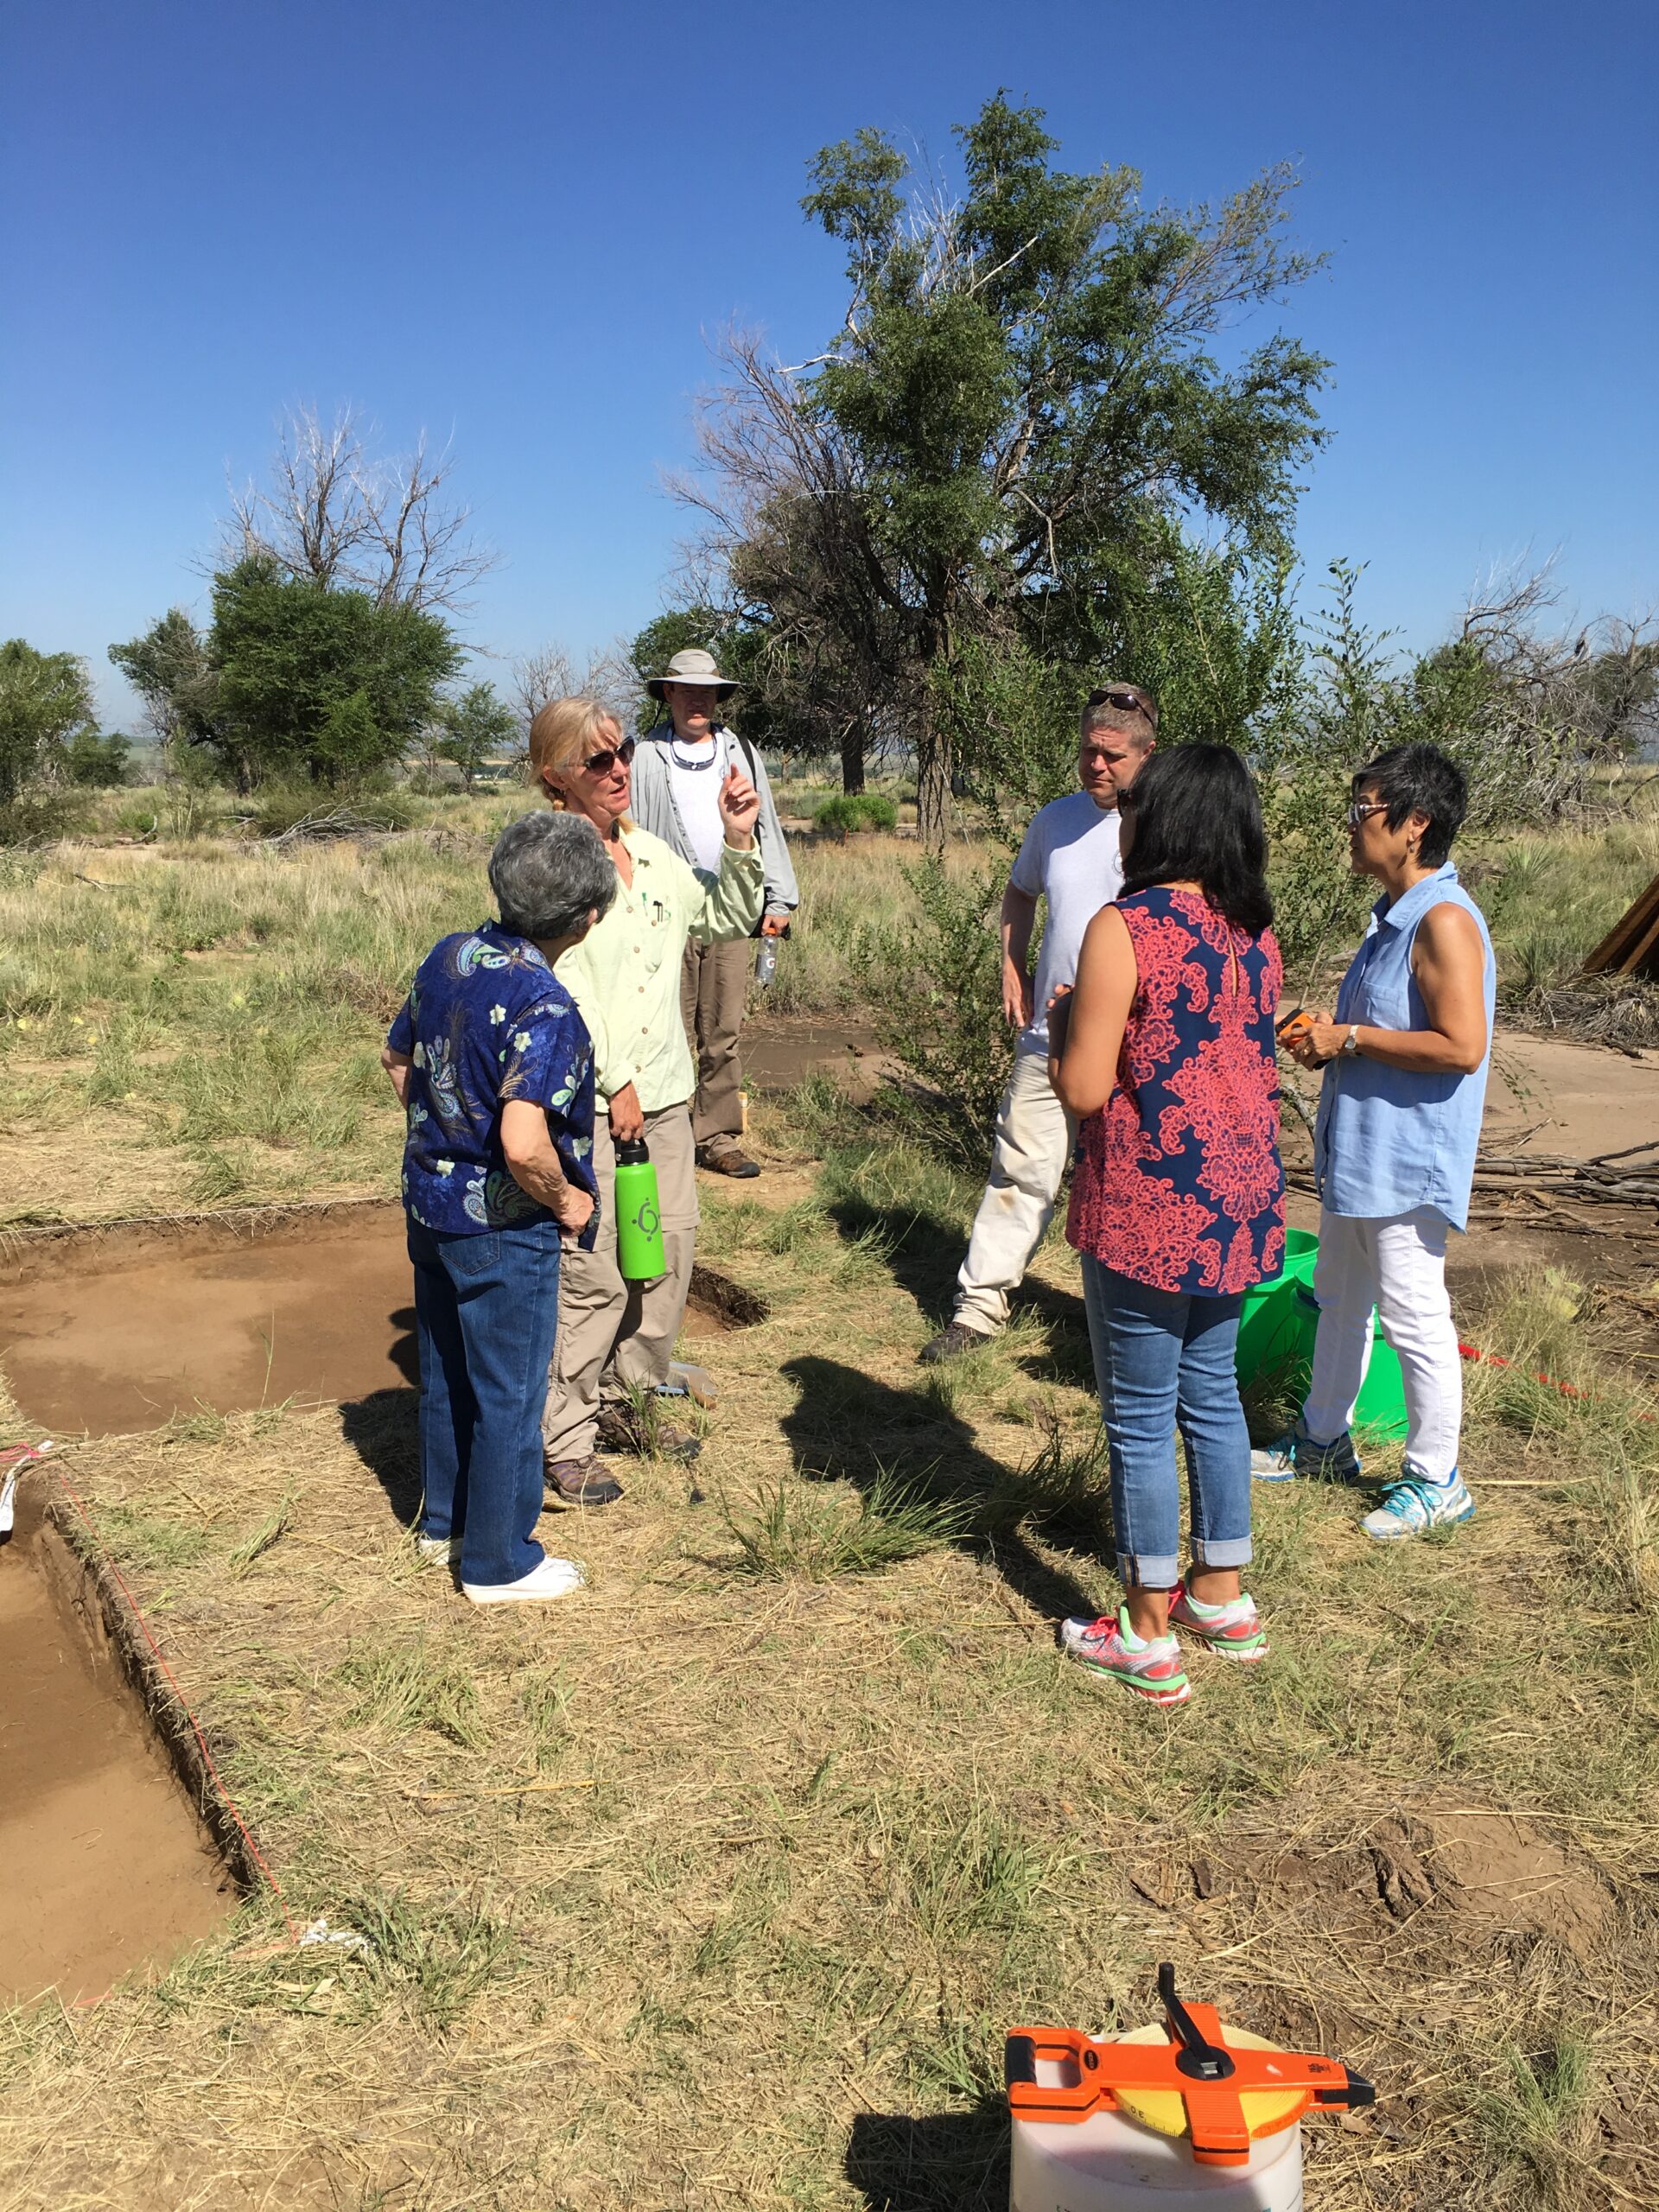 Visiting with archaeologists. Photo courtesy DU Amache Project.